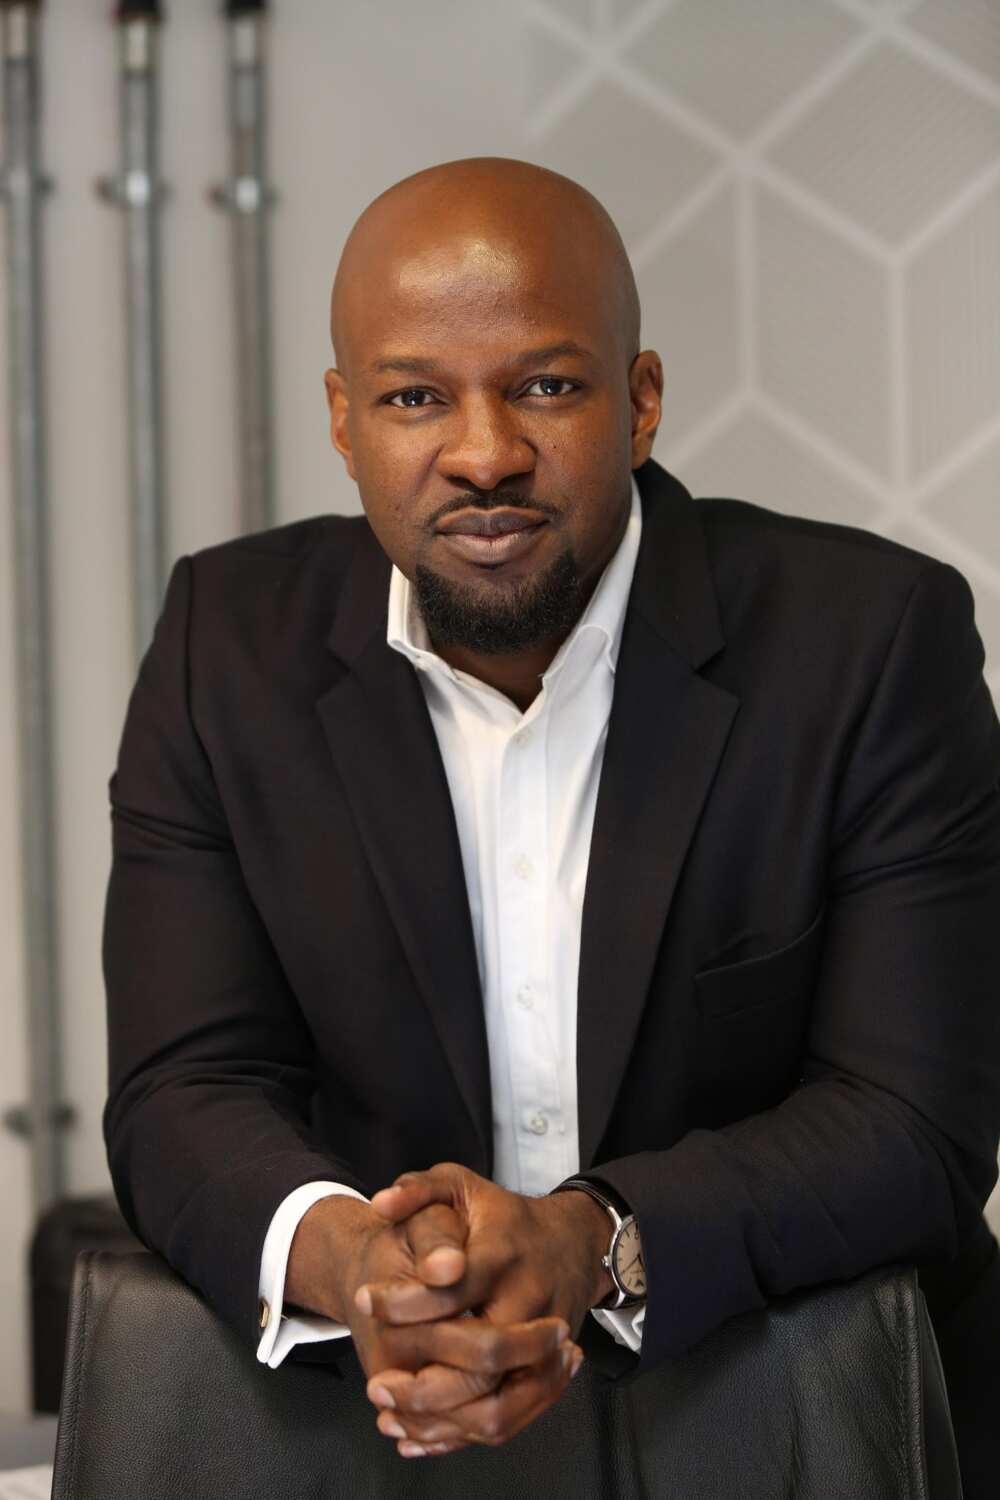 YouTube appoints Alex Okosi as managing director of emerging markets, EMEA